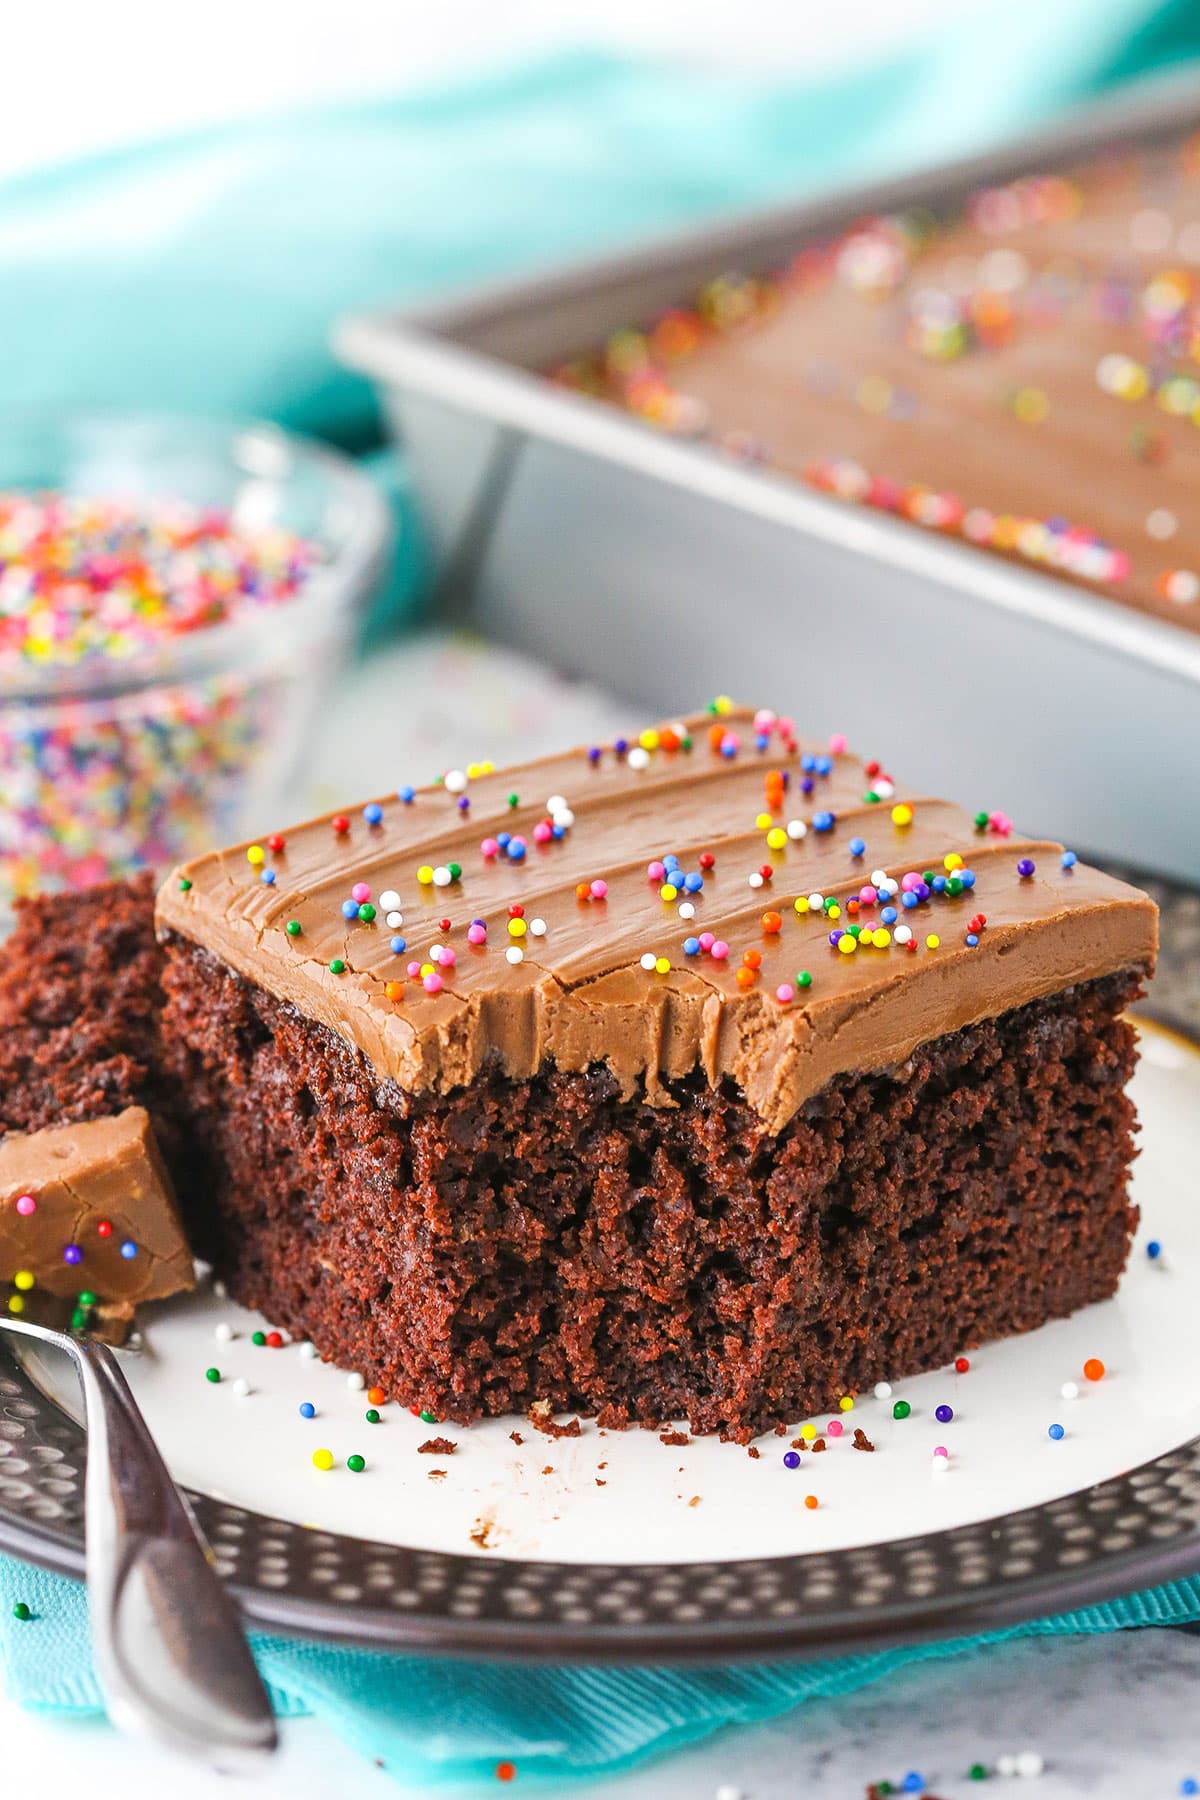 A single square serving of Wacky Cake with chocolate frosting and sprinkles with a bite removed on a white plate with a fork